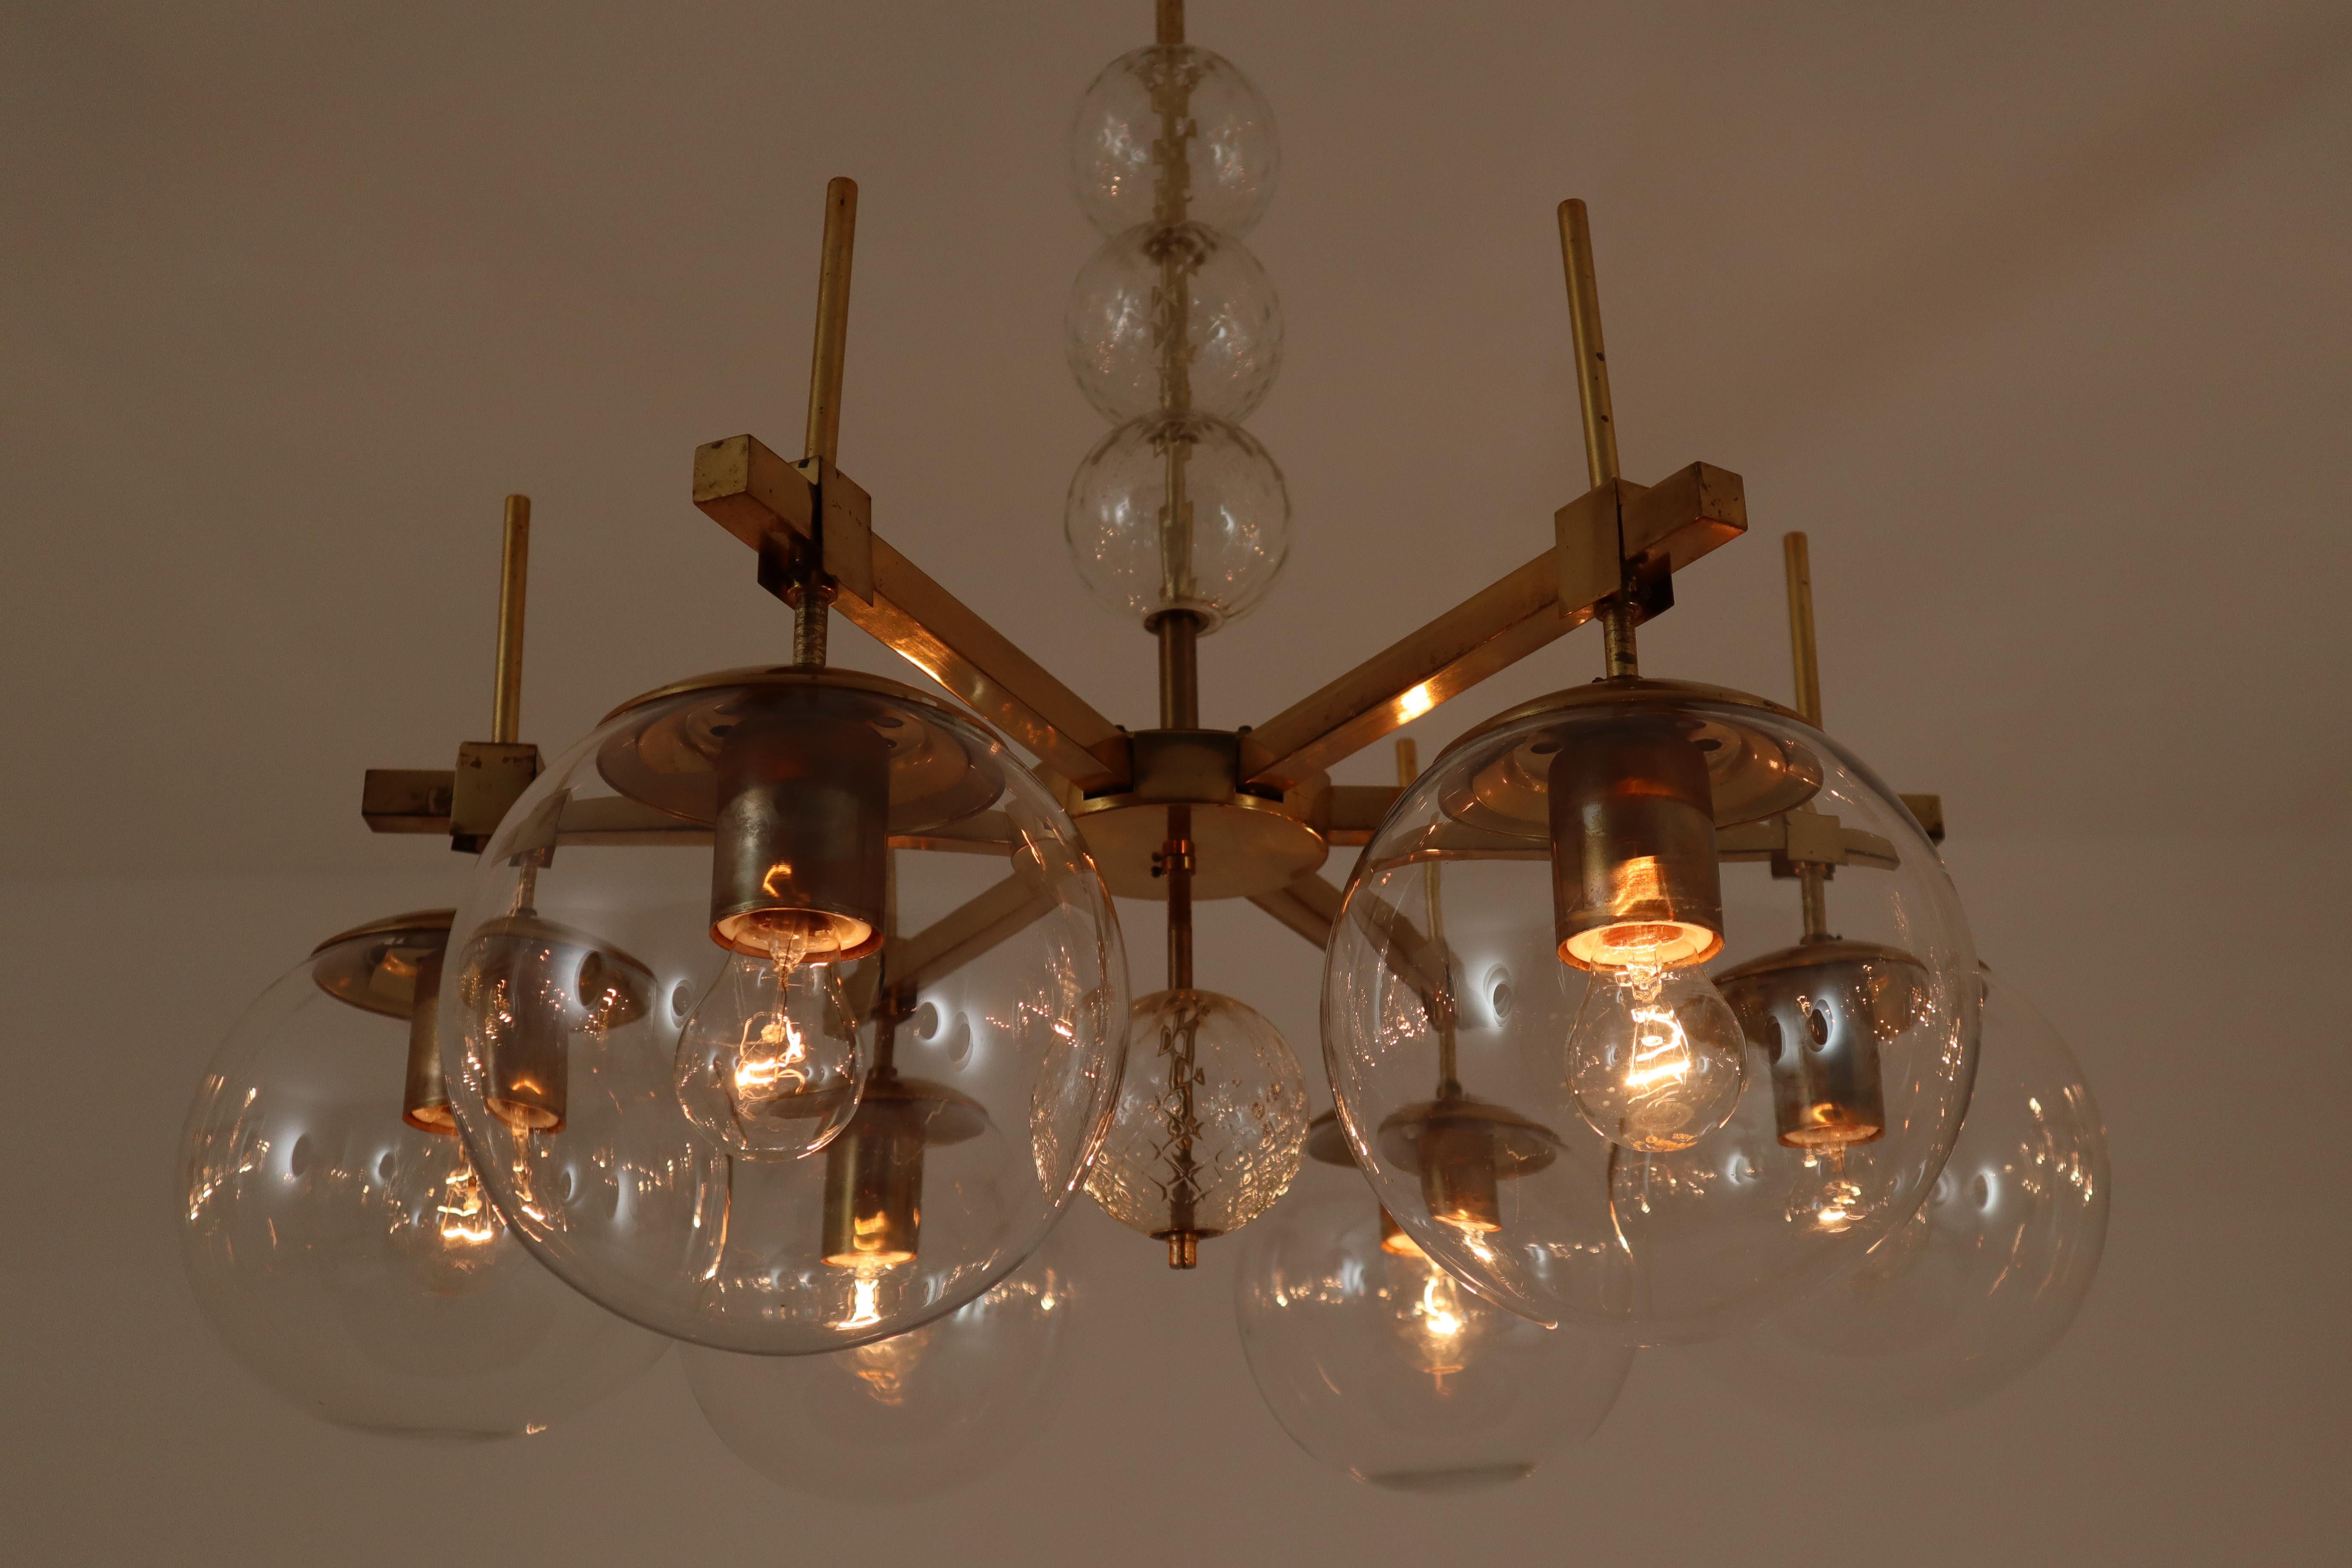 Six Midcentury Chandeliers with Brass Fixture and Hand-Blown Glass, Europe 1